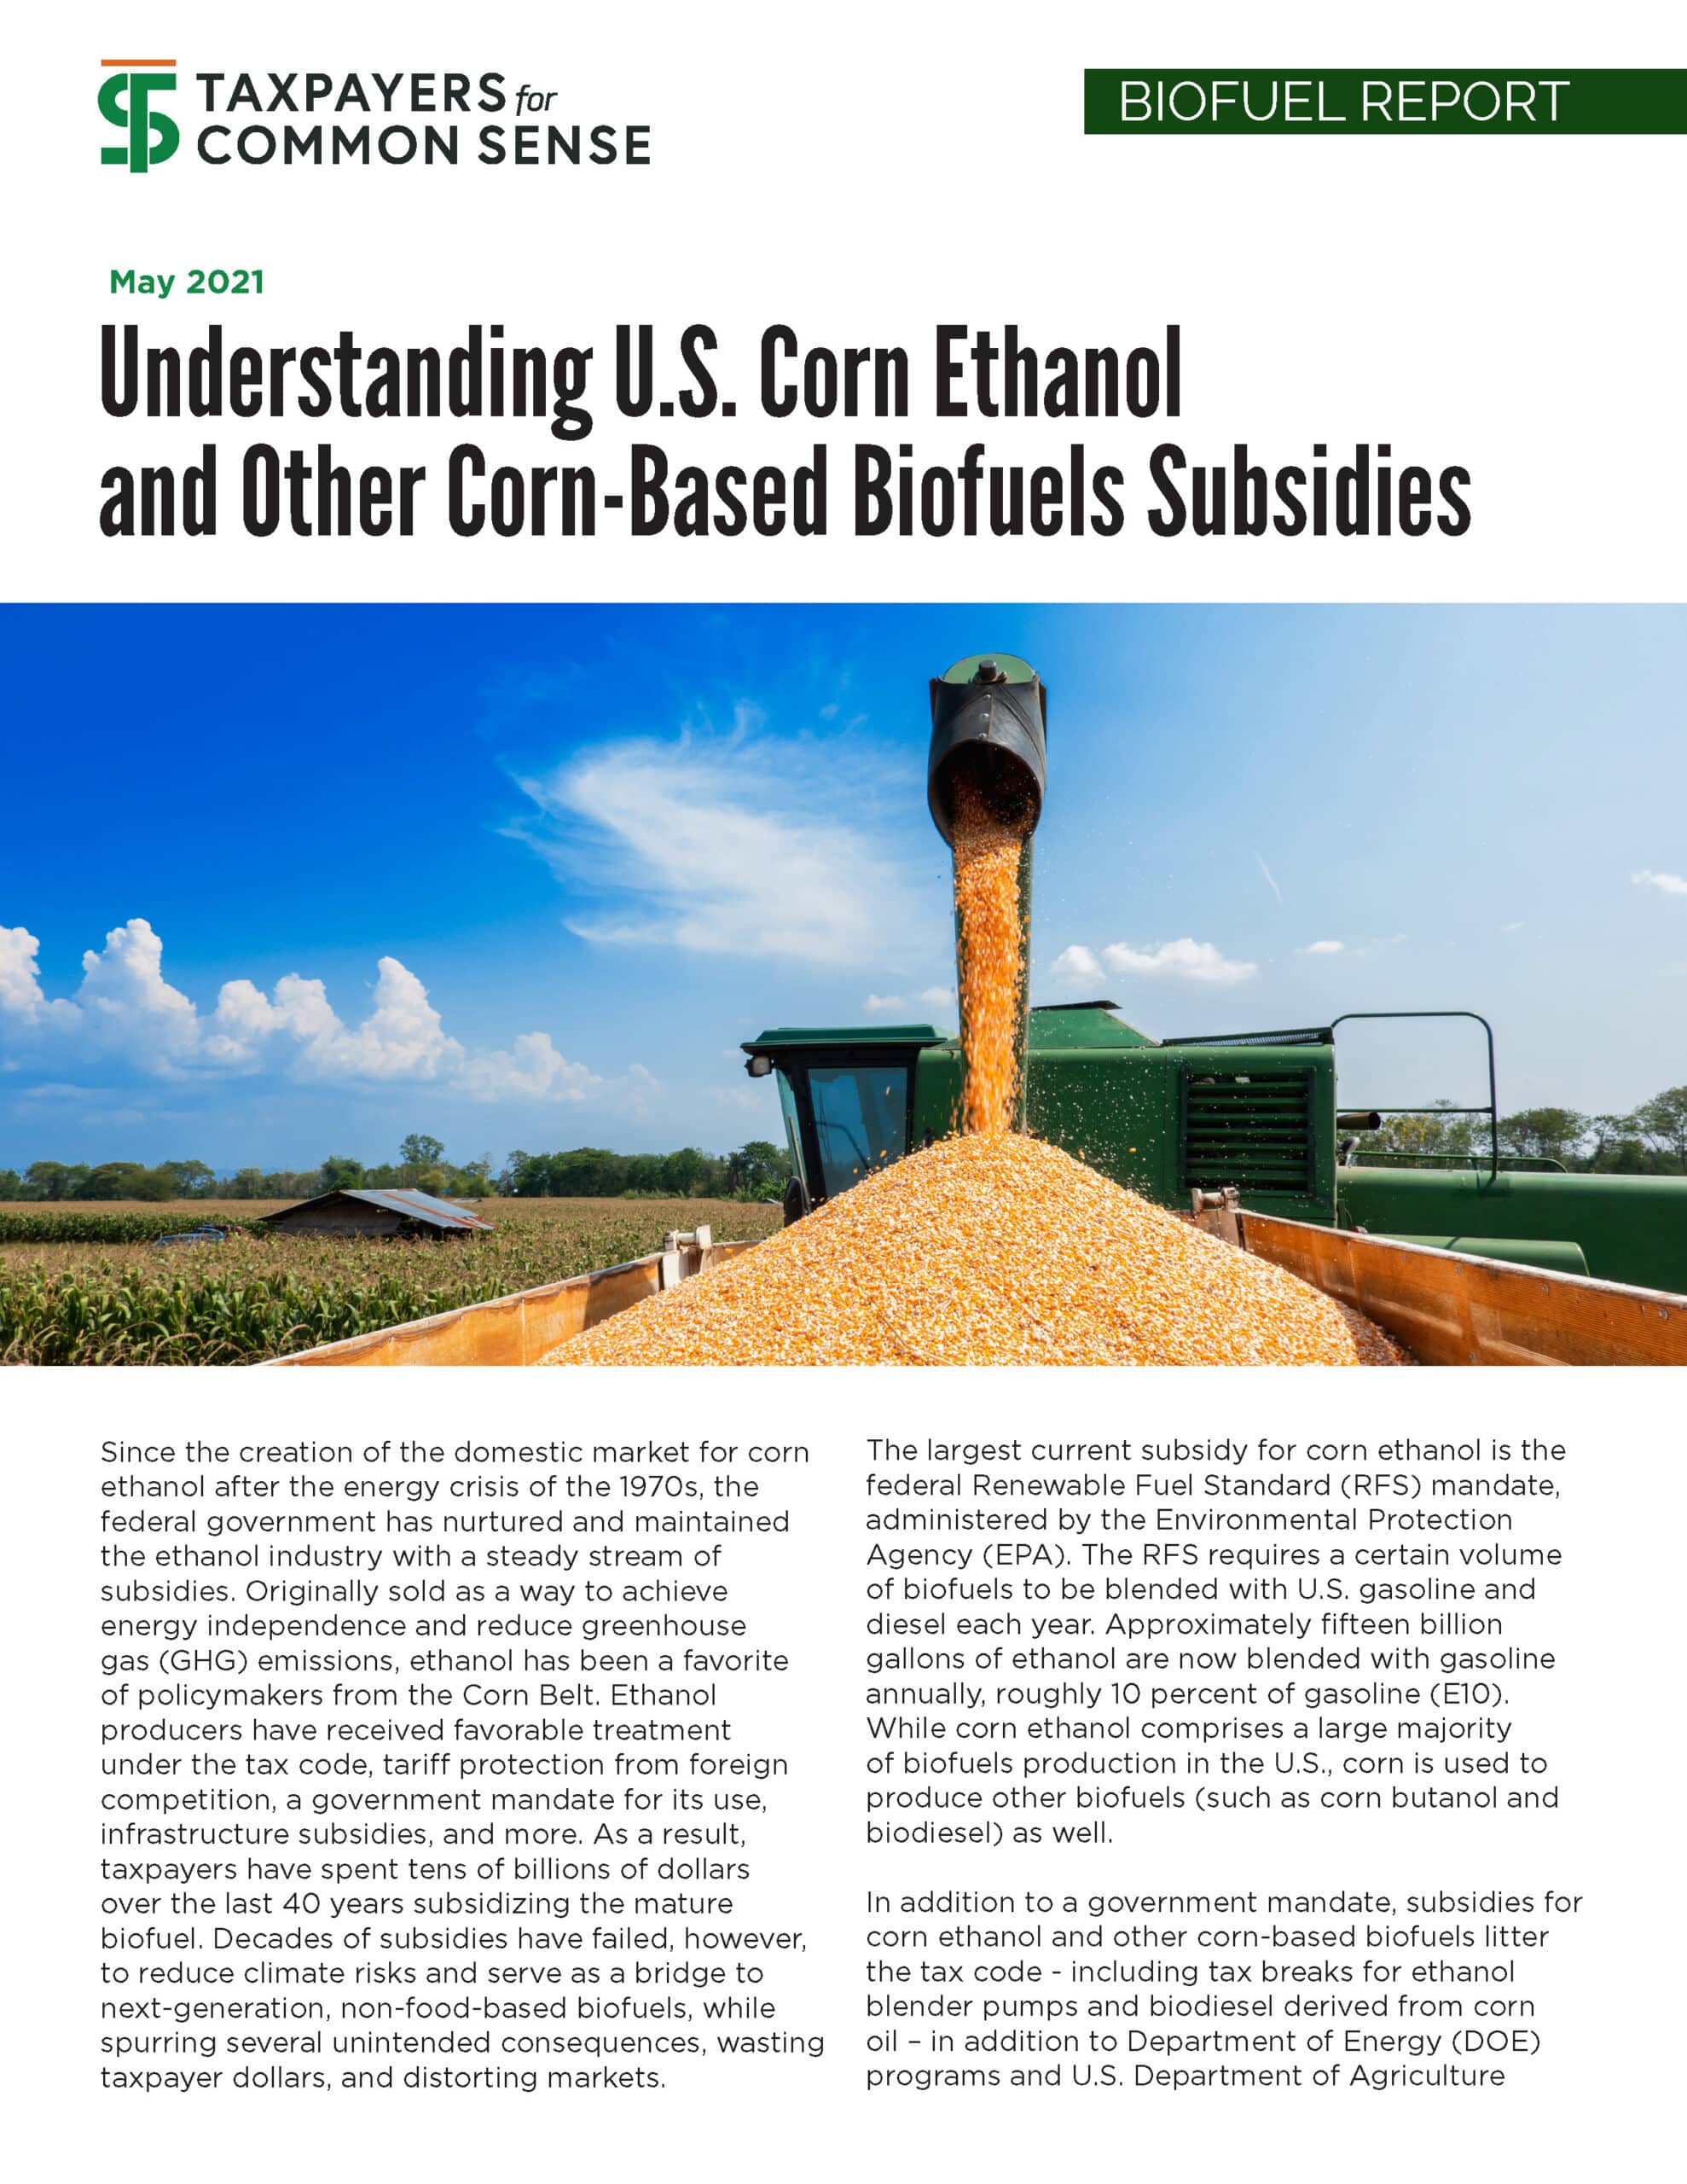 Cover of Understanding U.S. Corn Ethanol and Other Corn-Based Biofuels Report